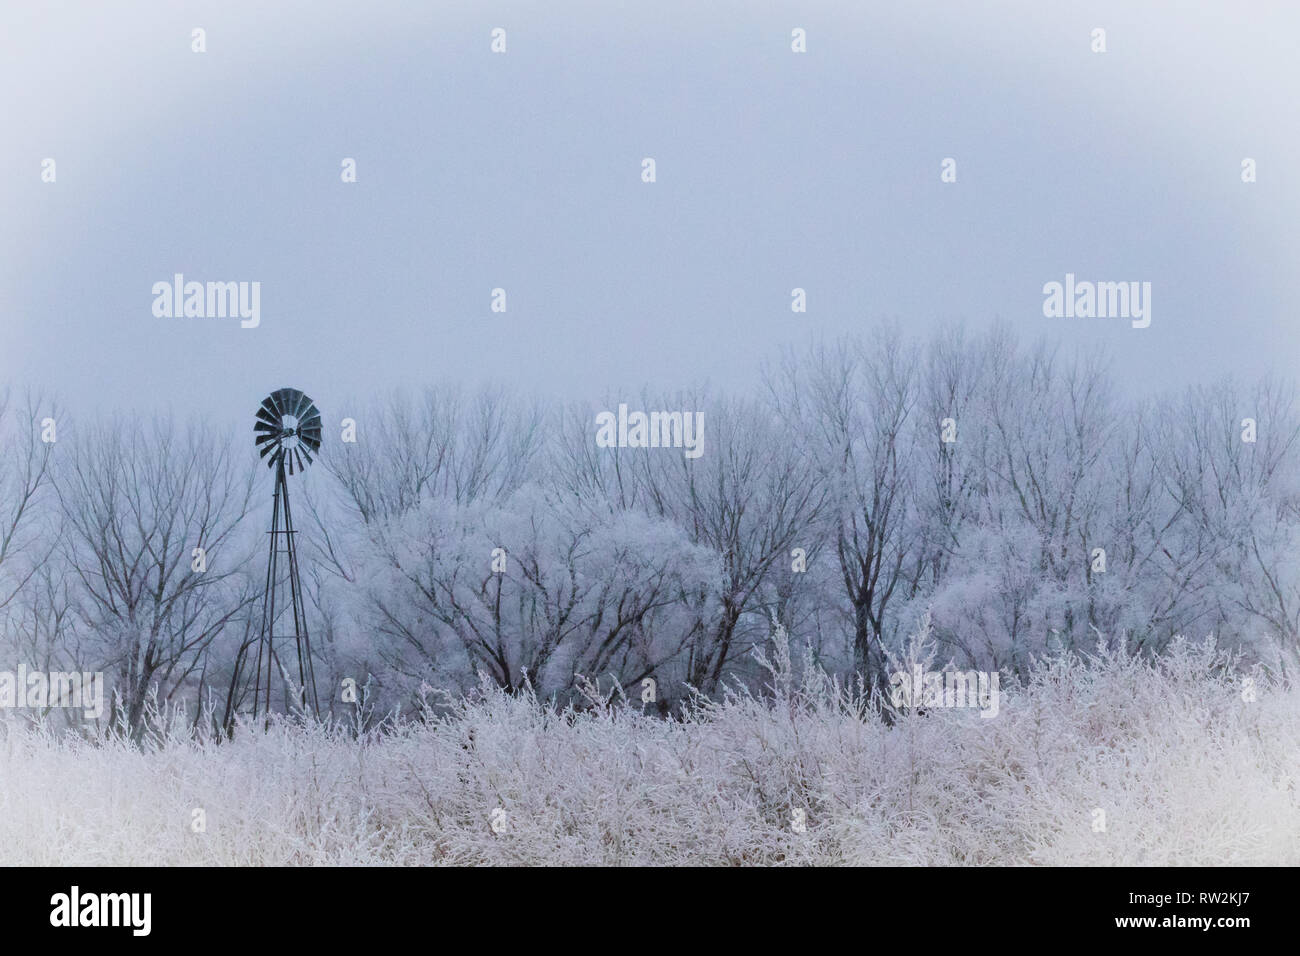 Down a Kansas back road stands a windmill among the frozen, frosted trees and grass. Oakley, Kansas 2019 Stock Photo